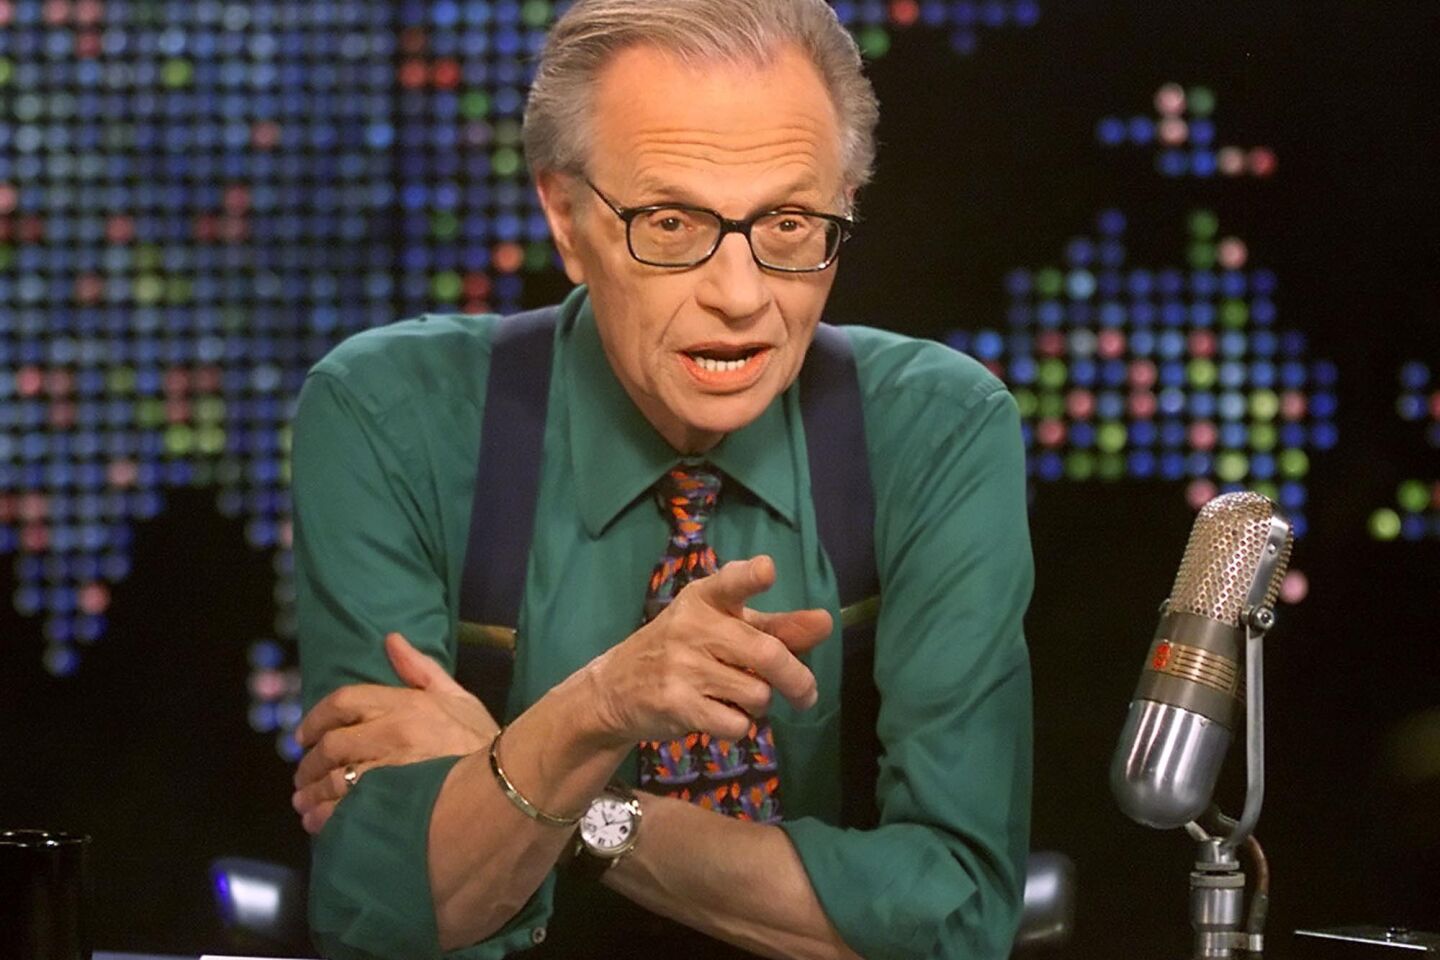 In a career that spanned half a century, Larry King became one of the most famous talk show hosts. He died at age 87.